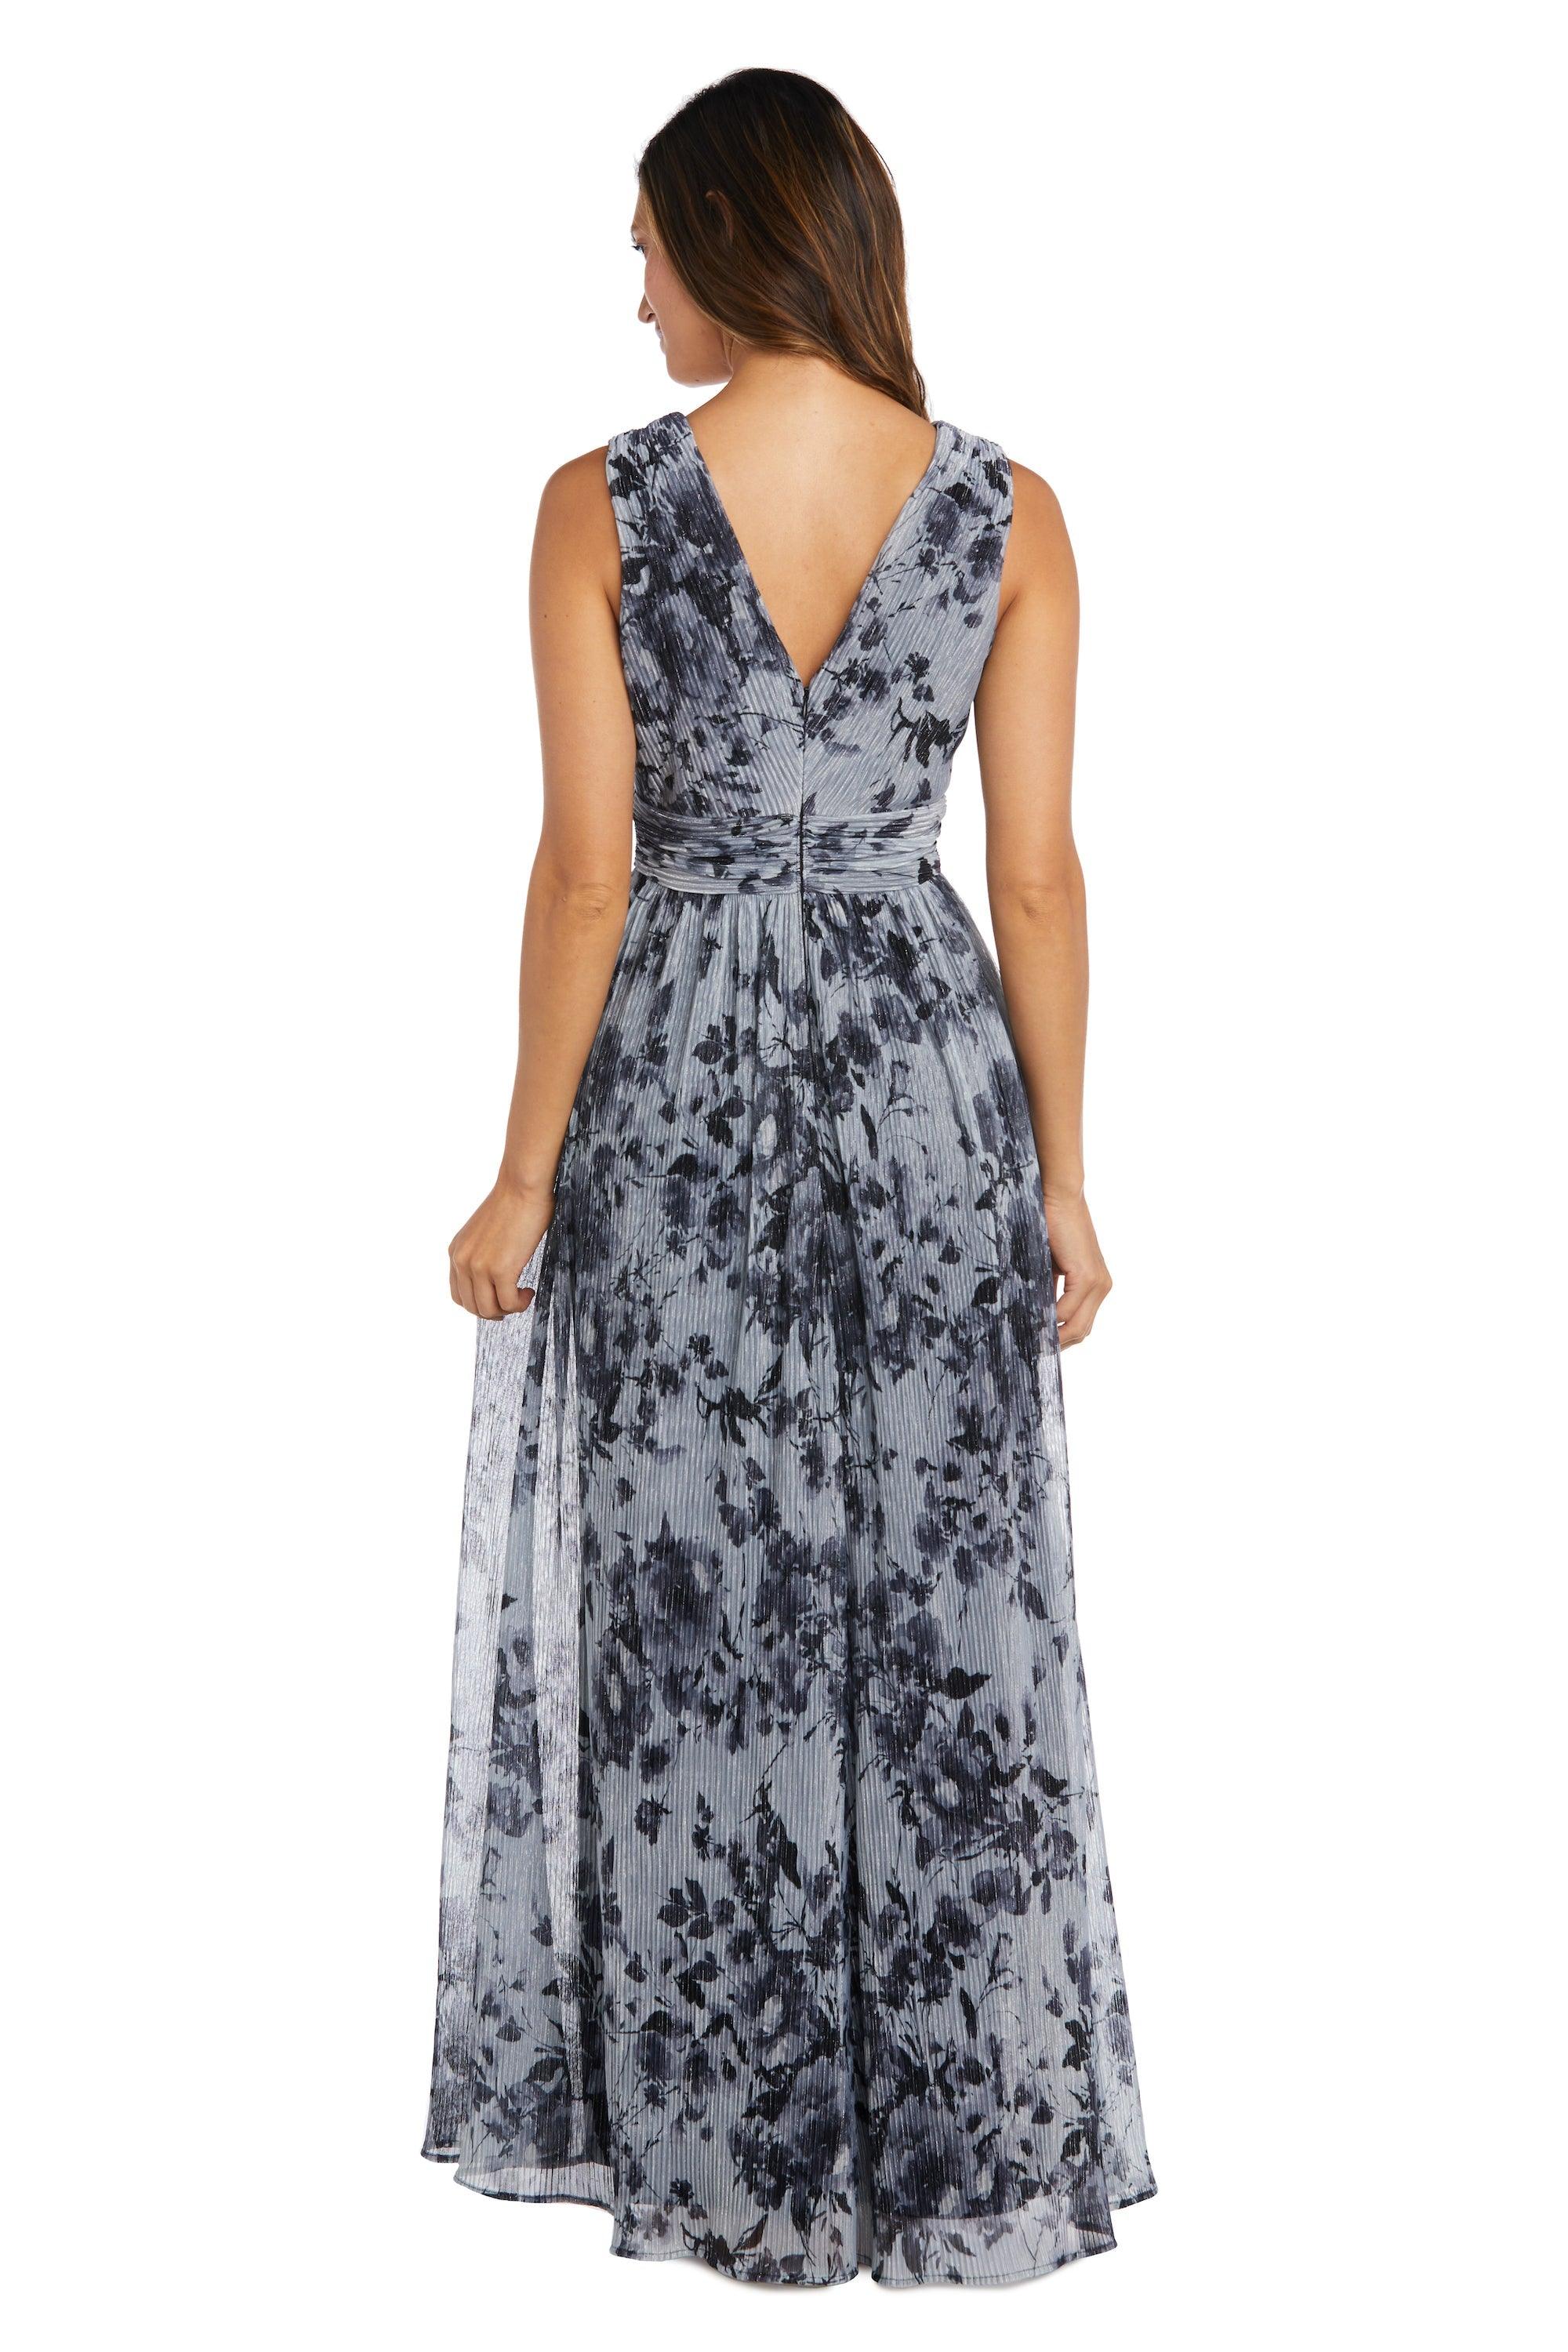 Women's Erdem Sale | Up to 70% Off | THE OUTNET